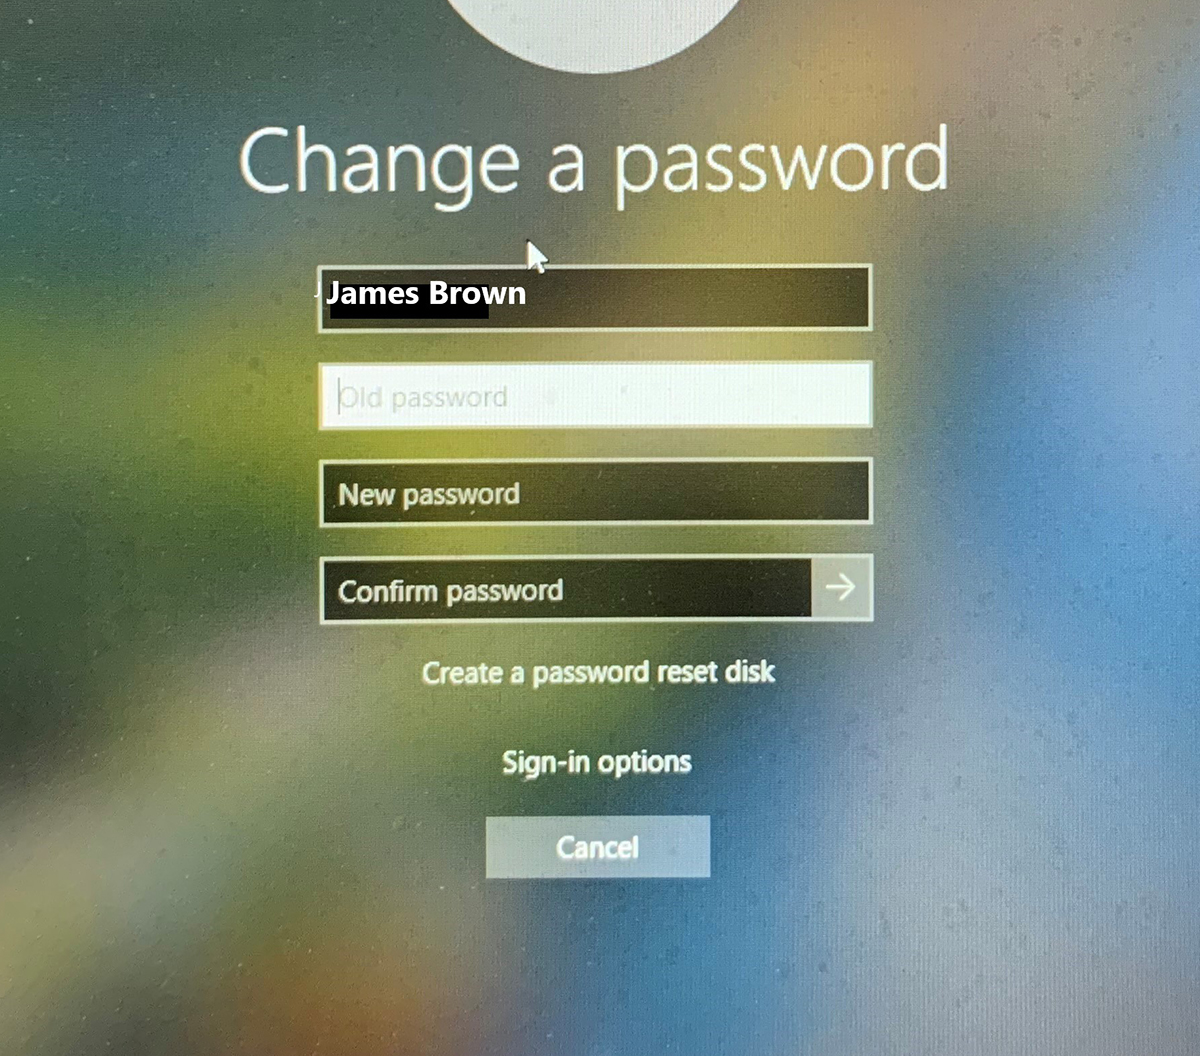 Change a password not proceeded